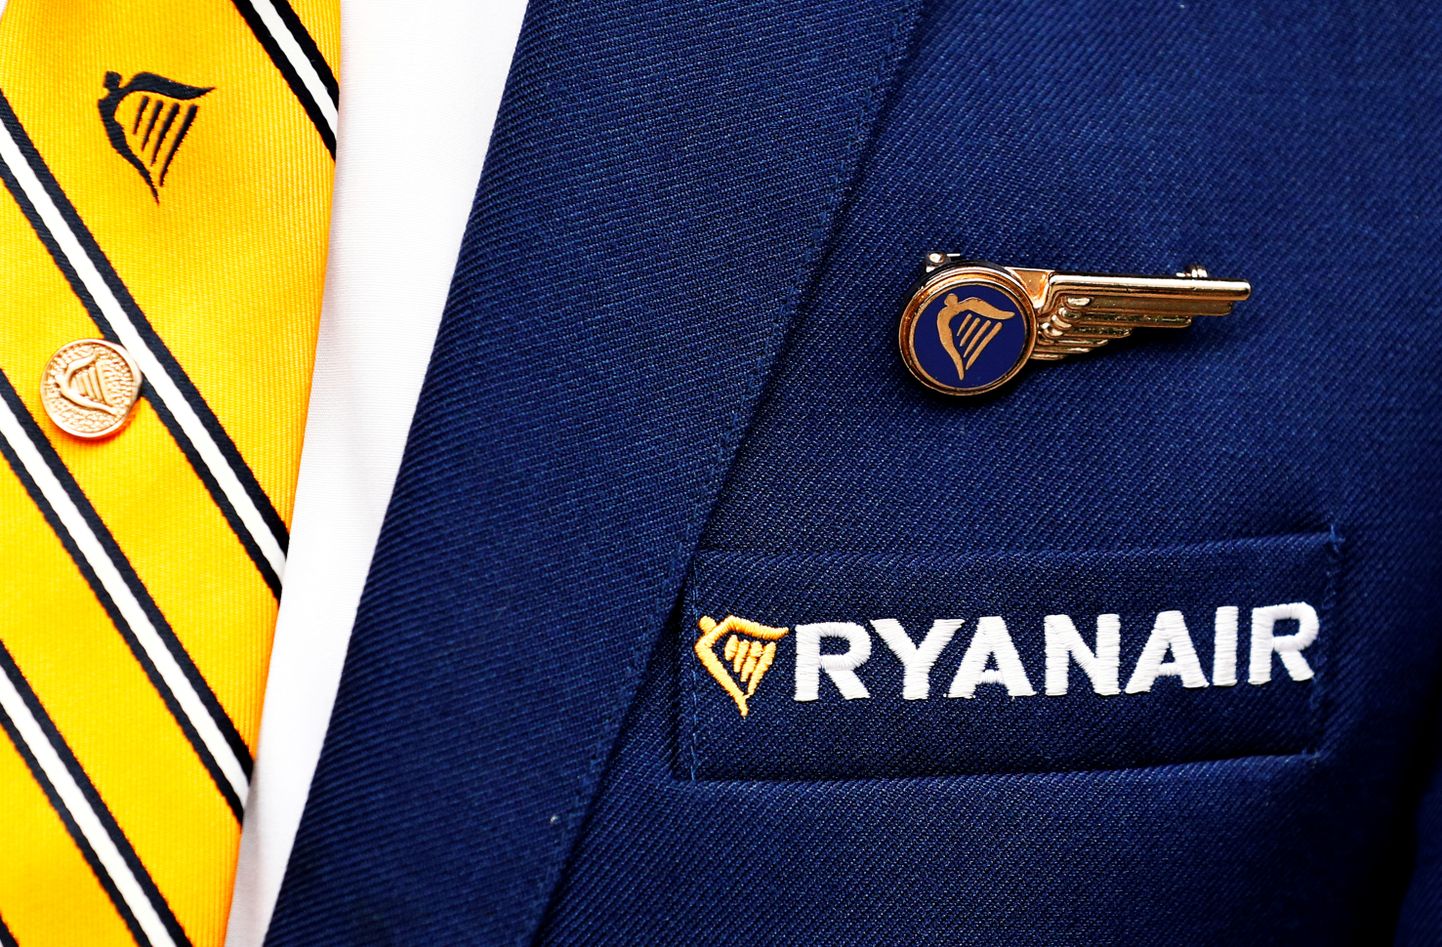 FILE PHOTO: Ryanair logo is pictured on the the jacket of a cabin crew member ahead of a news conference by Ryanair union representatives in Brussels, Belgium September 13, 2018.   REUTERS/Francois Lenoir/File Photo